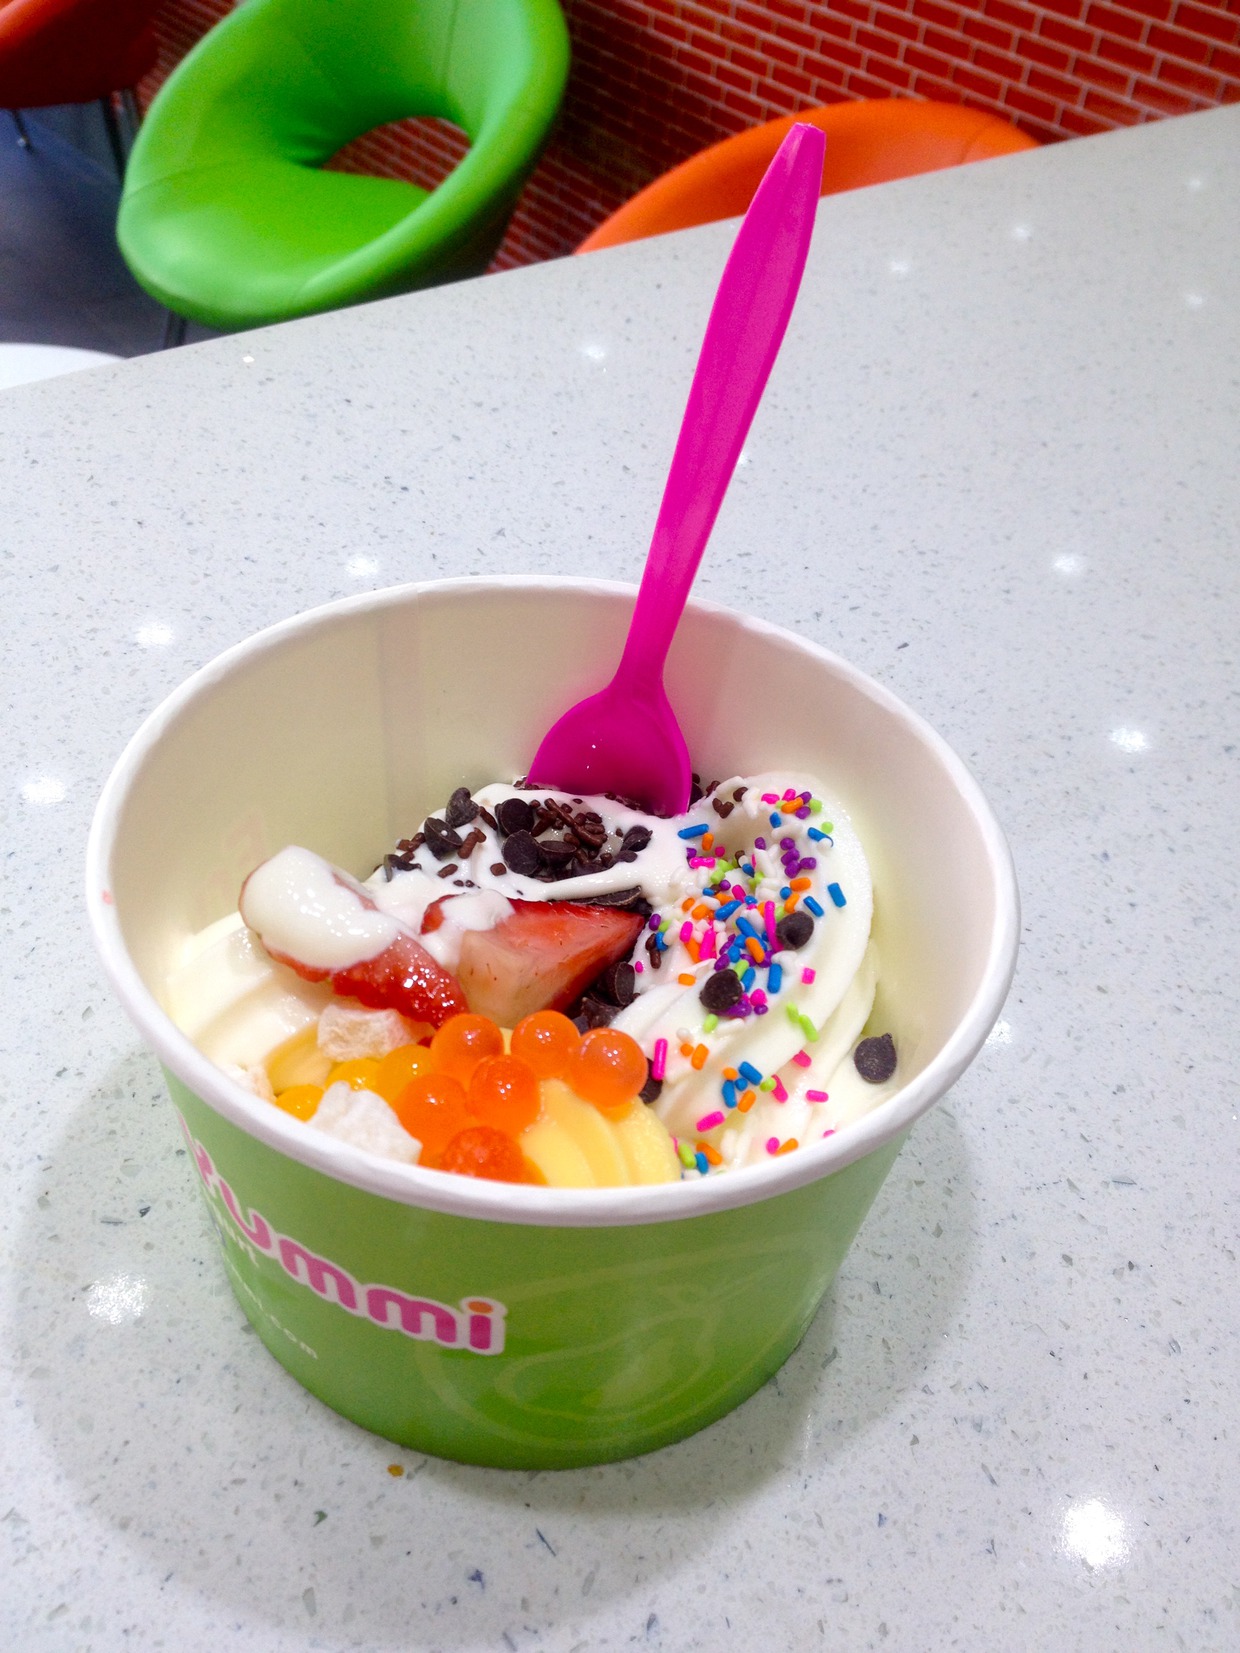 New Froyo Shop Fruitti Yummi Opens on Knickerbocker, Expect Bright Colors and Top 40 Music